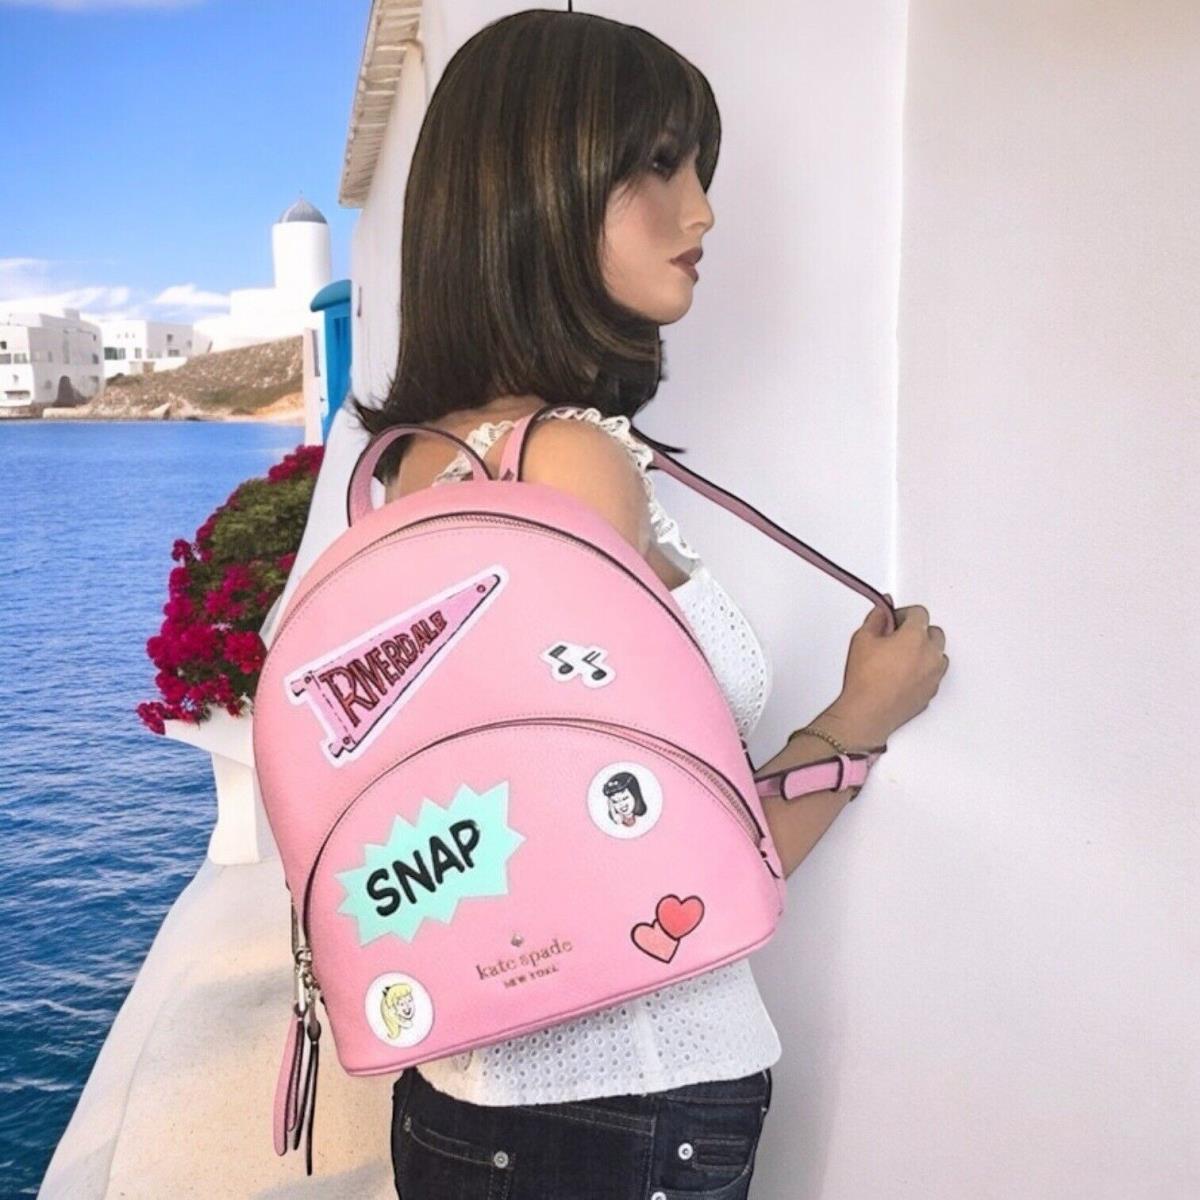 Kate Spade Pink Archie Comics Backpack Betty Veronica Leather Bag Motif